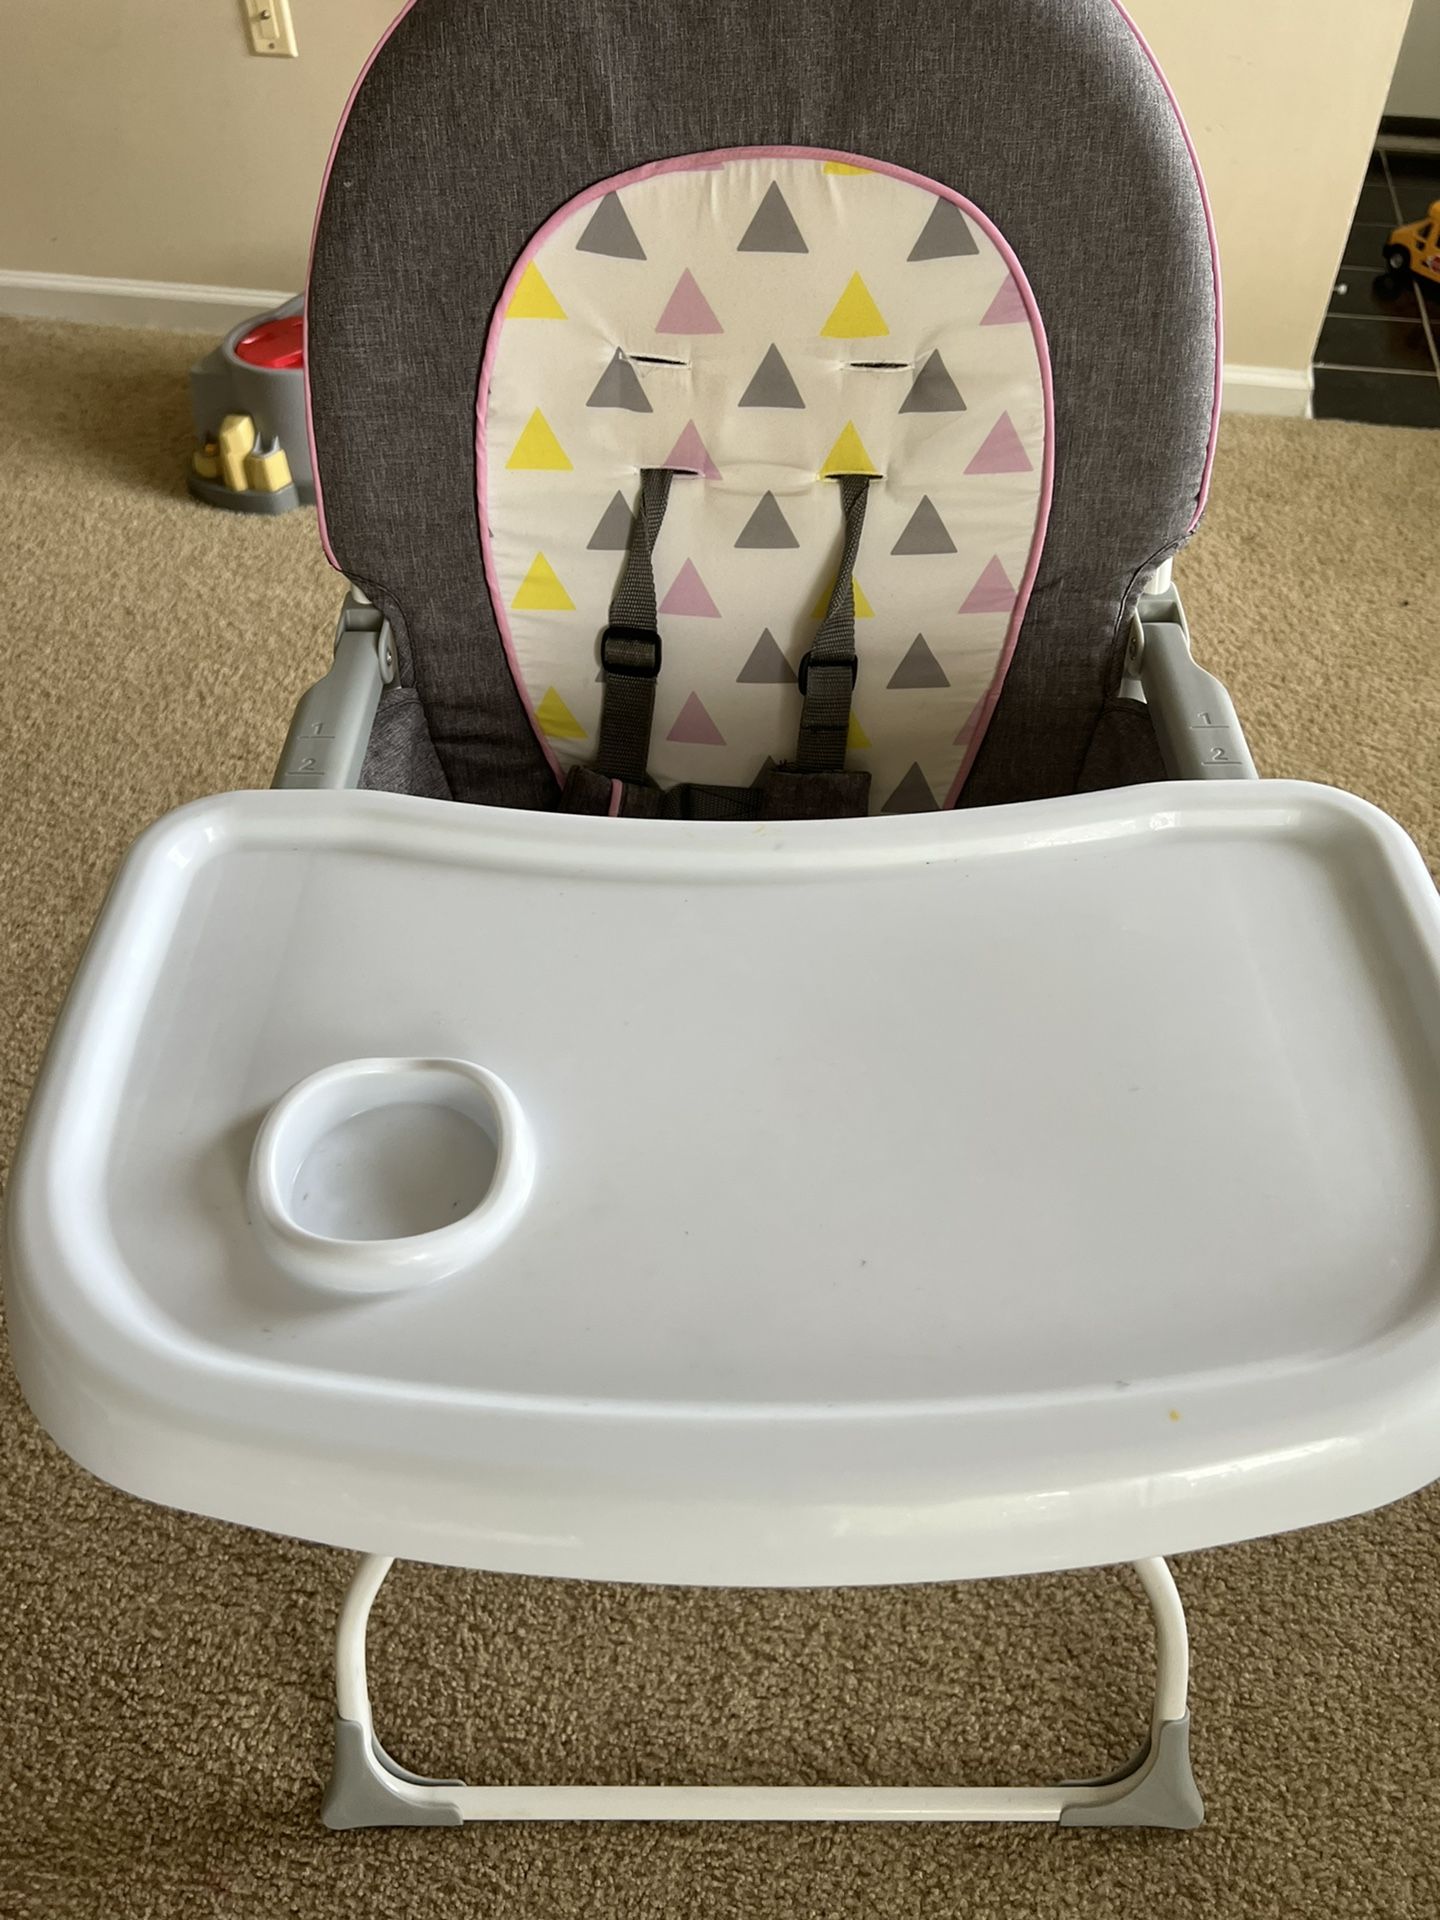 MOVE OUT SALE - Limited Used - High Chair With Safety Belts + 2 Silicon Bibs